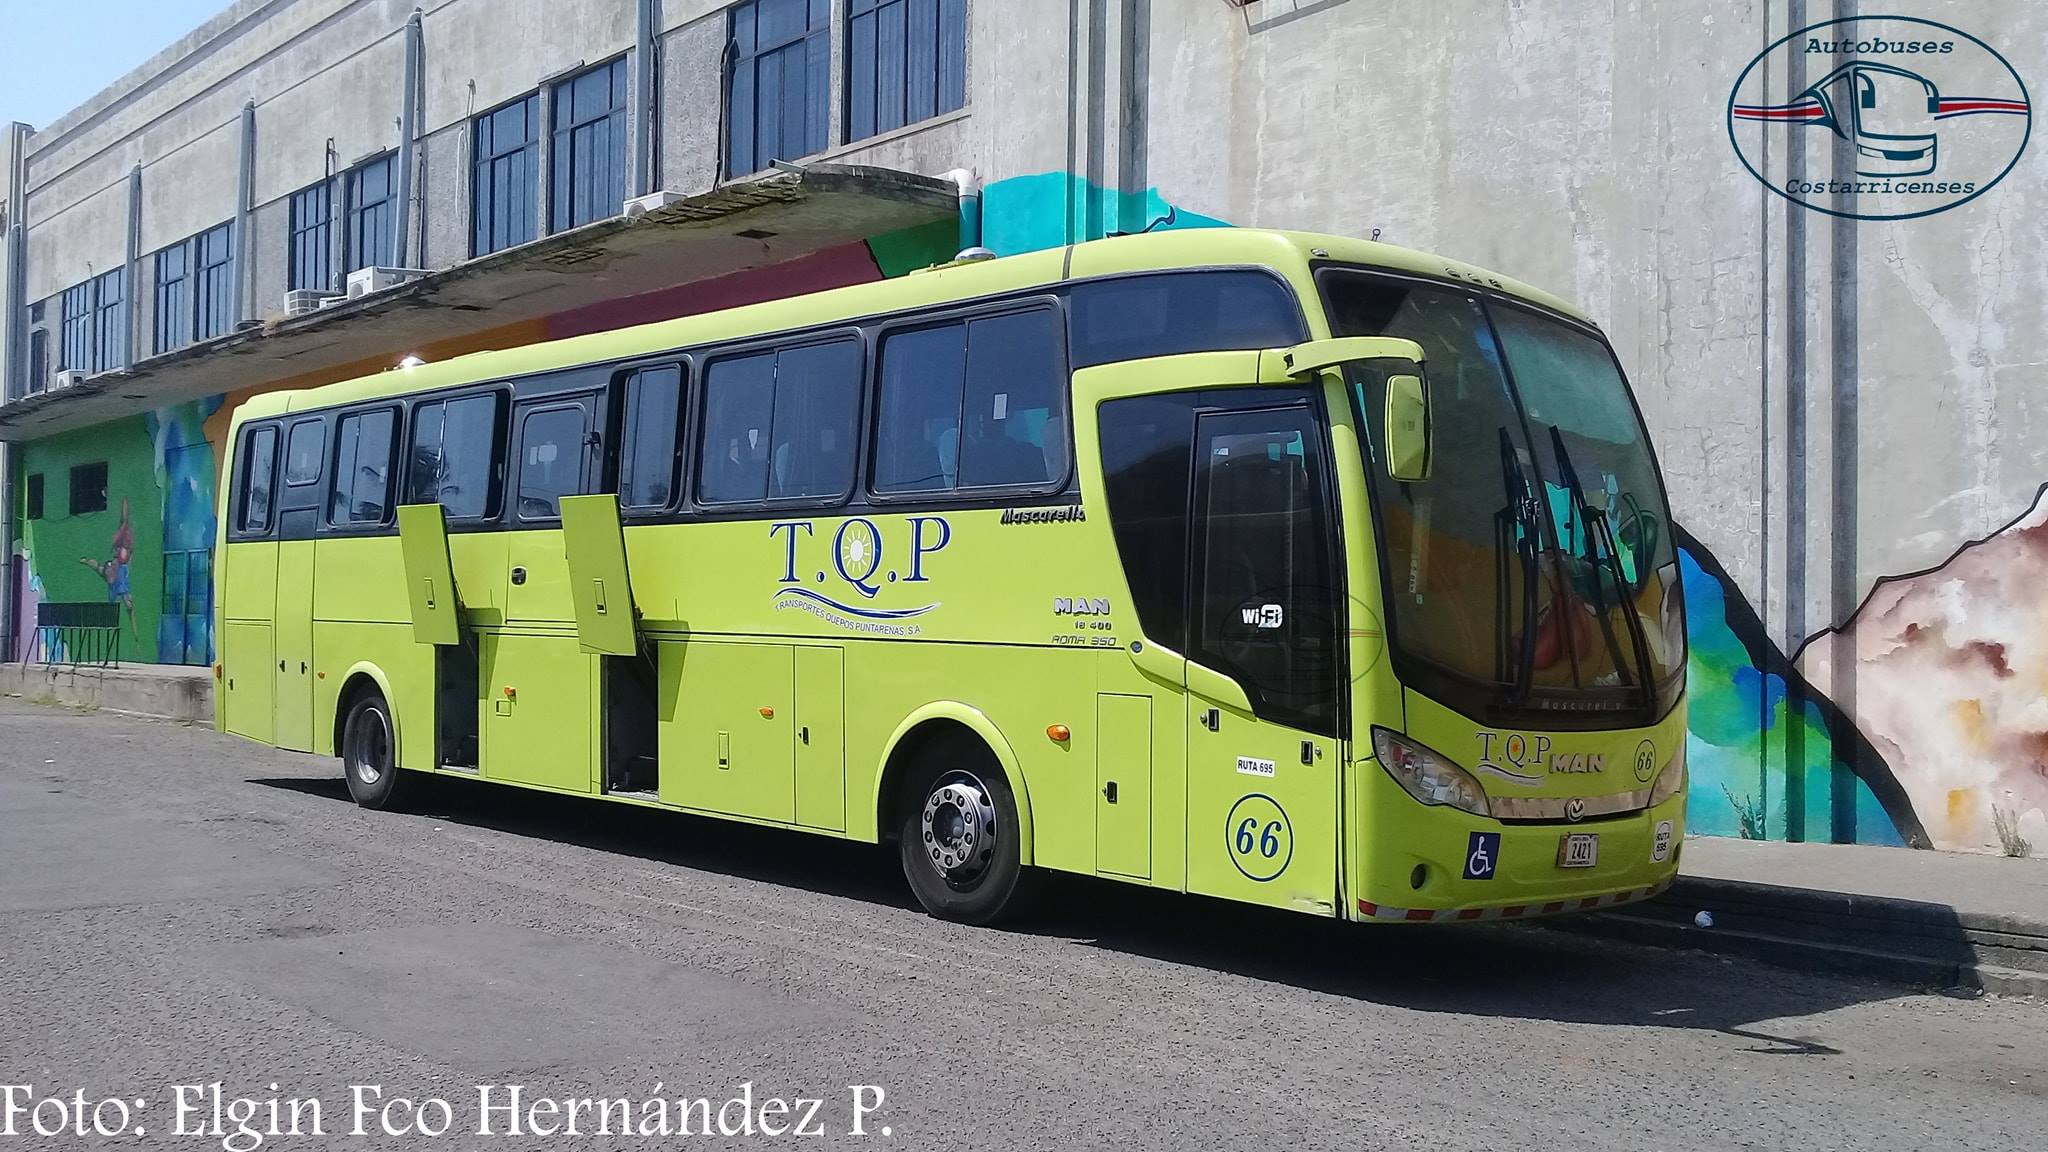 How To Get From Manuel Antonio To Tamarindo - All Possible Ways, cheapest way from Manuel Antonio to Tamarindo,Manuel Antonio to Tamarindo, Manuel Antonio to Tamarindo bus, Puntarenas to Liberia bus, Liberia to Tamarindo bus, Manuel Antonio to Puntarenas bus, Quepos to Puntarenas bus, Manuel Antonio to Quepos bus, Quepos to Manuel Antonio